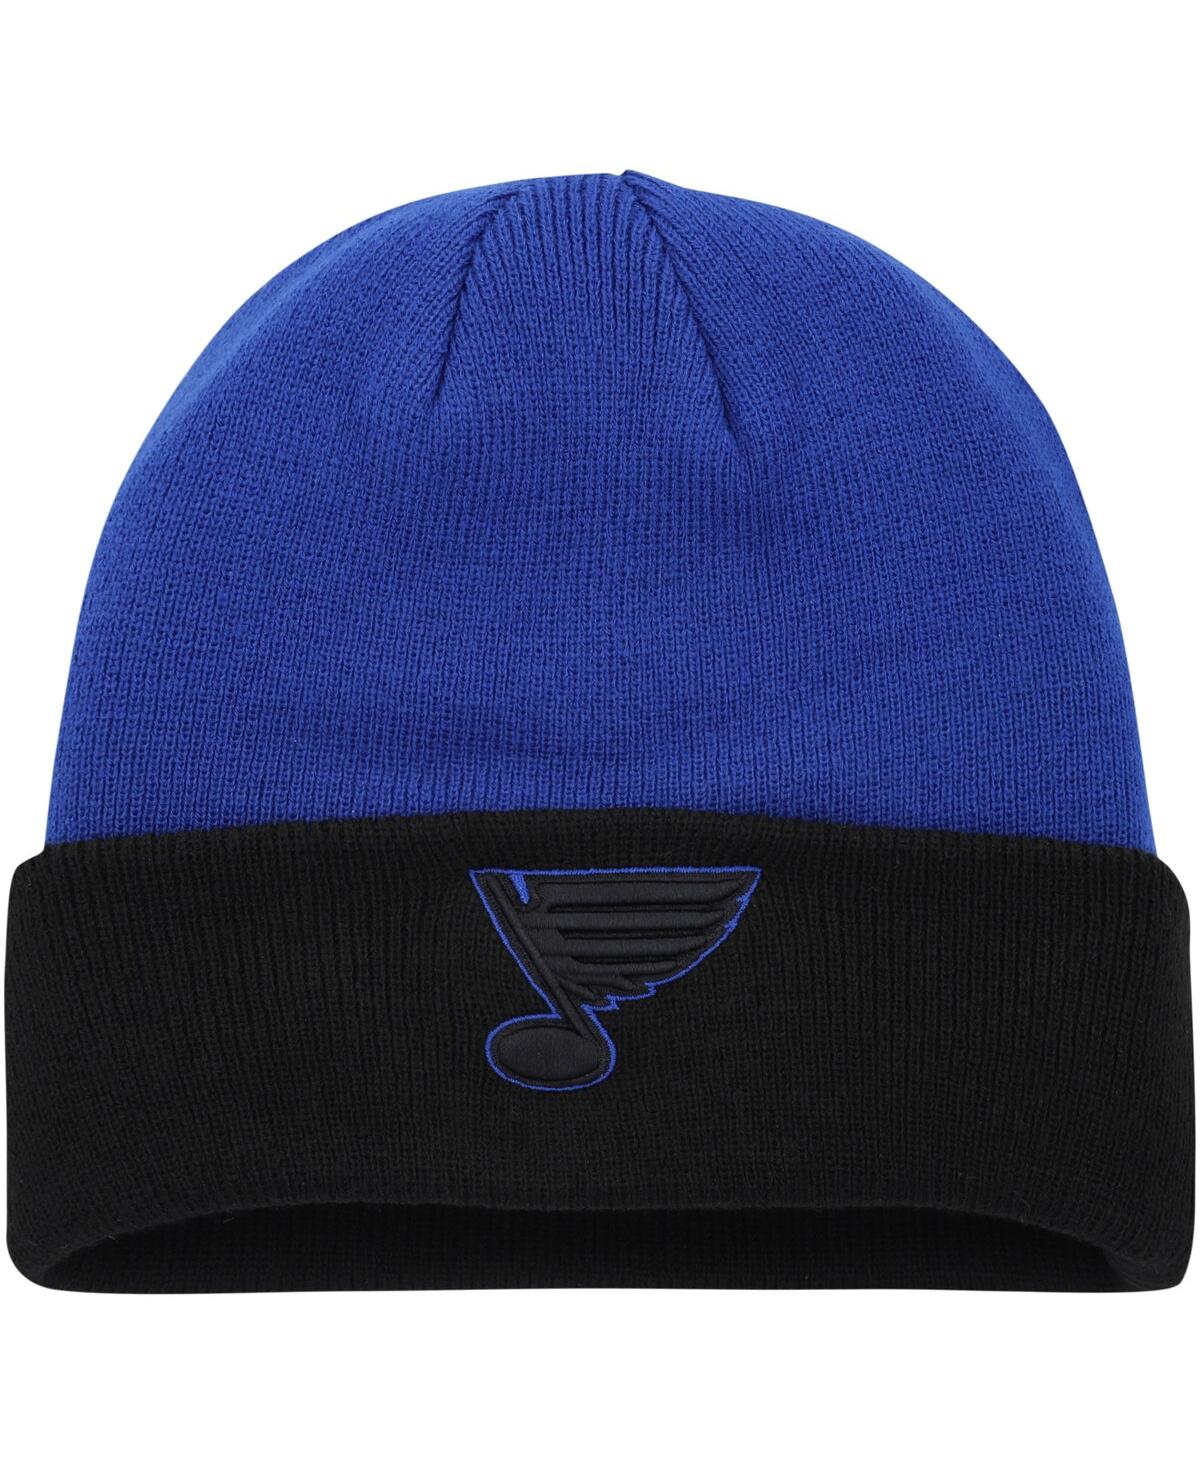 Outerstuff Kids' Youth Boys And Girls Blue, Black St. Louis Blues Logo Outline Cuffed Knit Hat In Blue,black